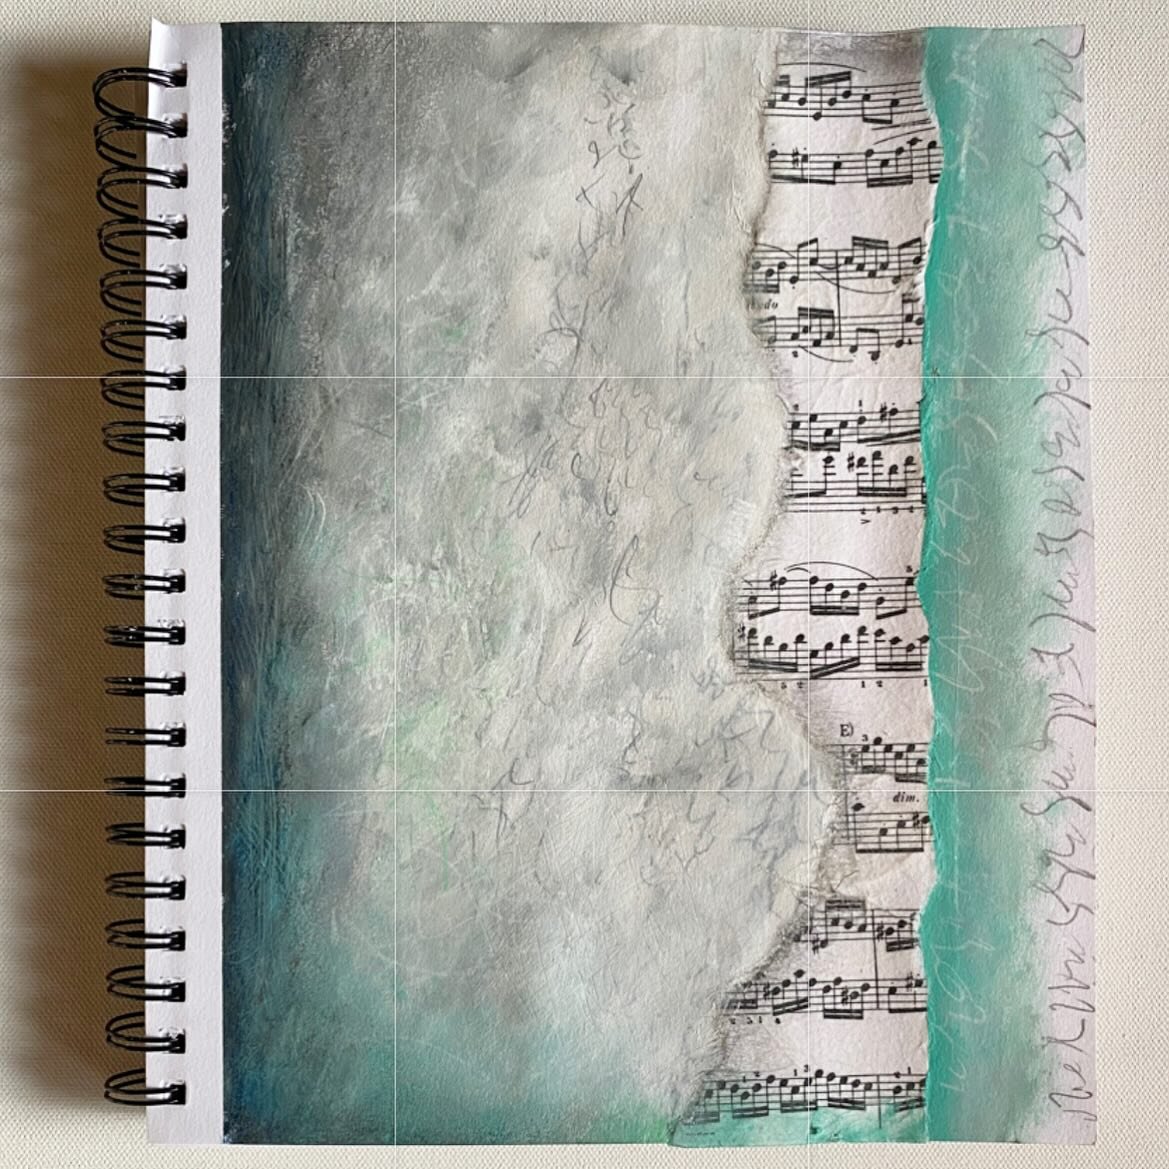 Sketchbook Play: TEAL, WHITE, &amp; BLACK - #insightcreative30daychallenge This was a limited palette prompt. Originally it was the prompt for Day 22 of the Cheryl Taves - 30 Day Sketchbook Challenge. I have been continuing the challenge in my own wa